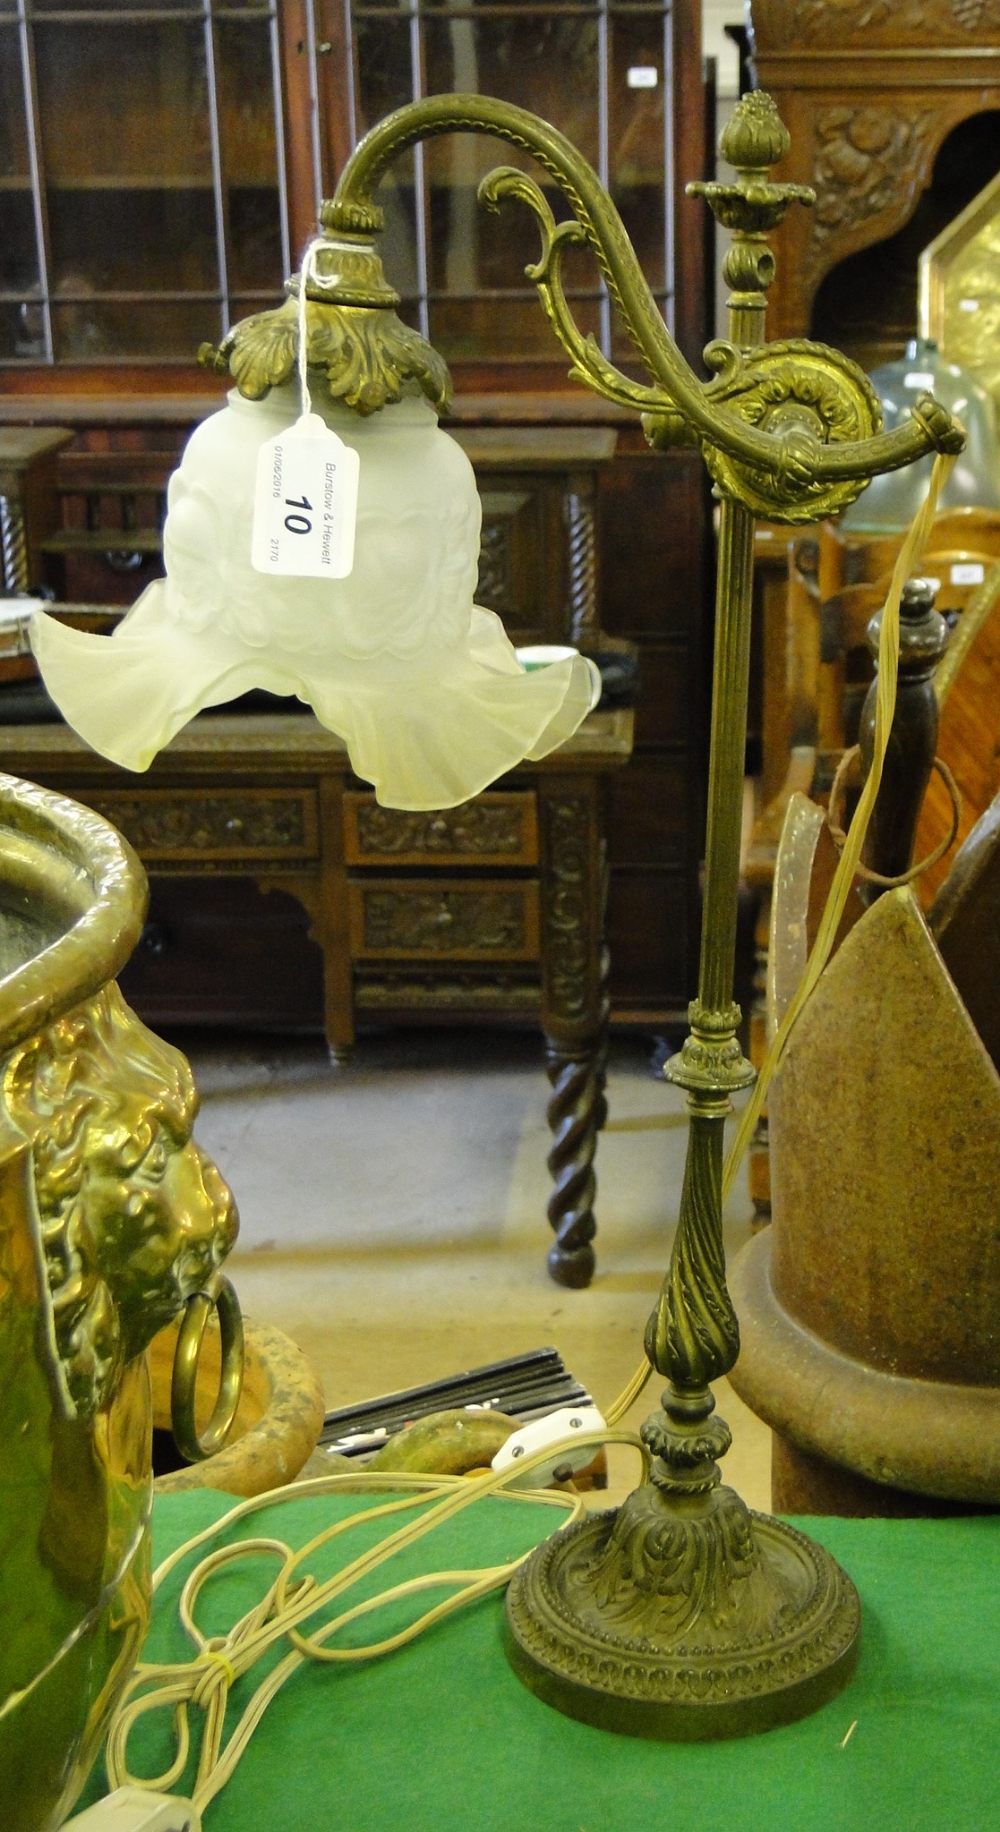 An ornate Victorian gilt brass desk lamp with rise and fall action and original frilled glass shade.